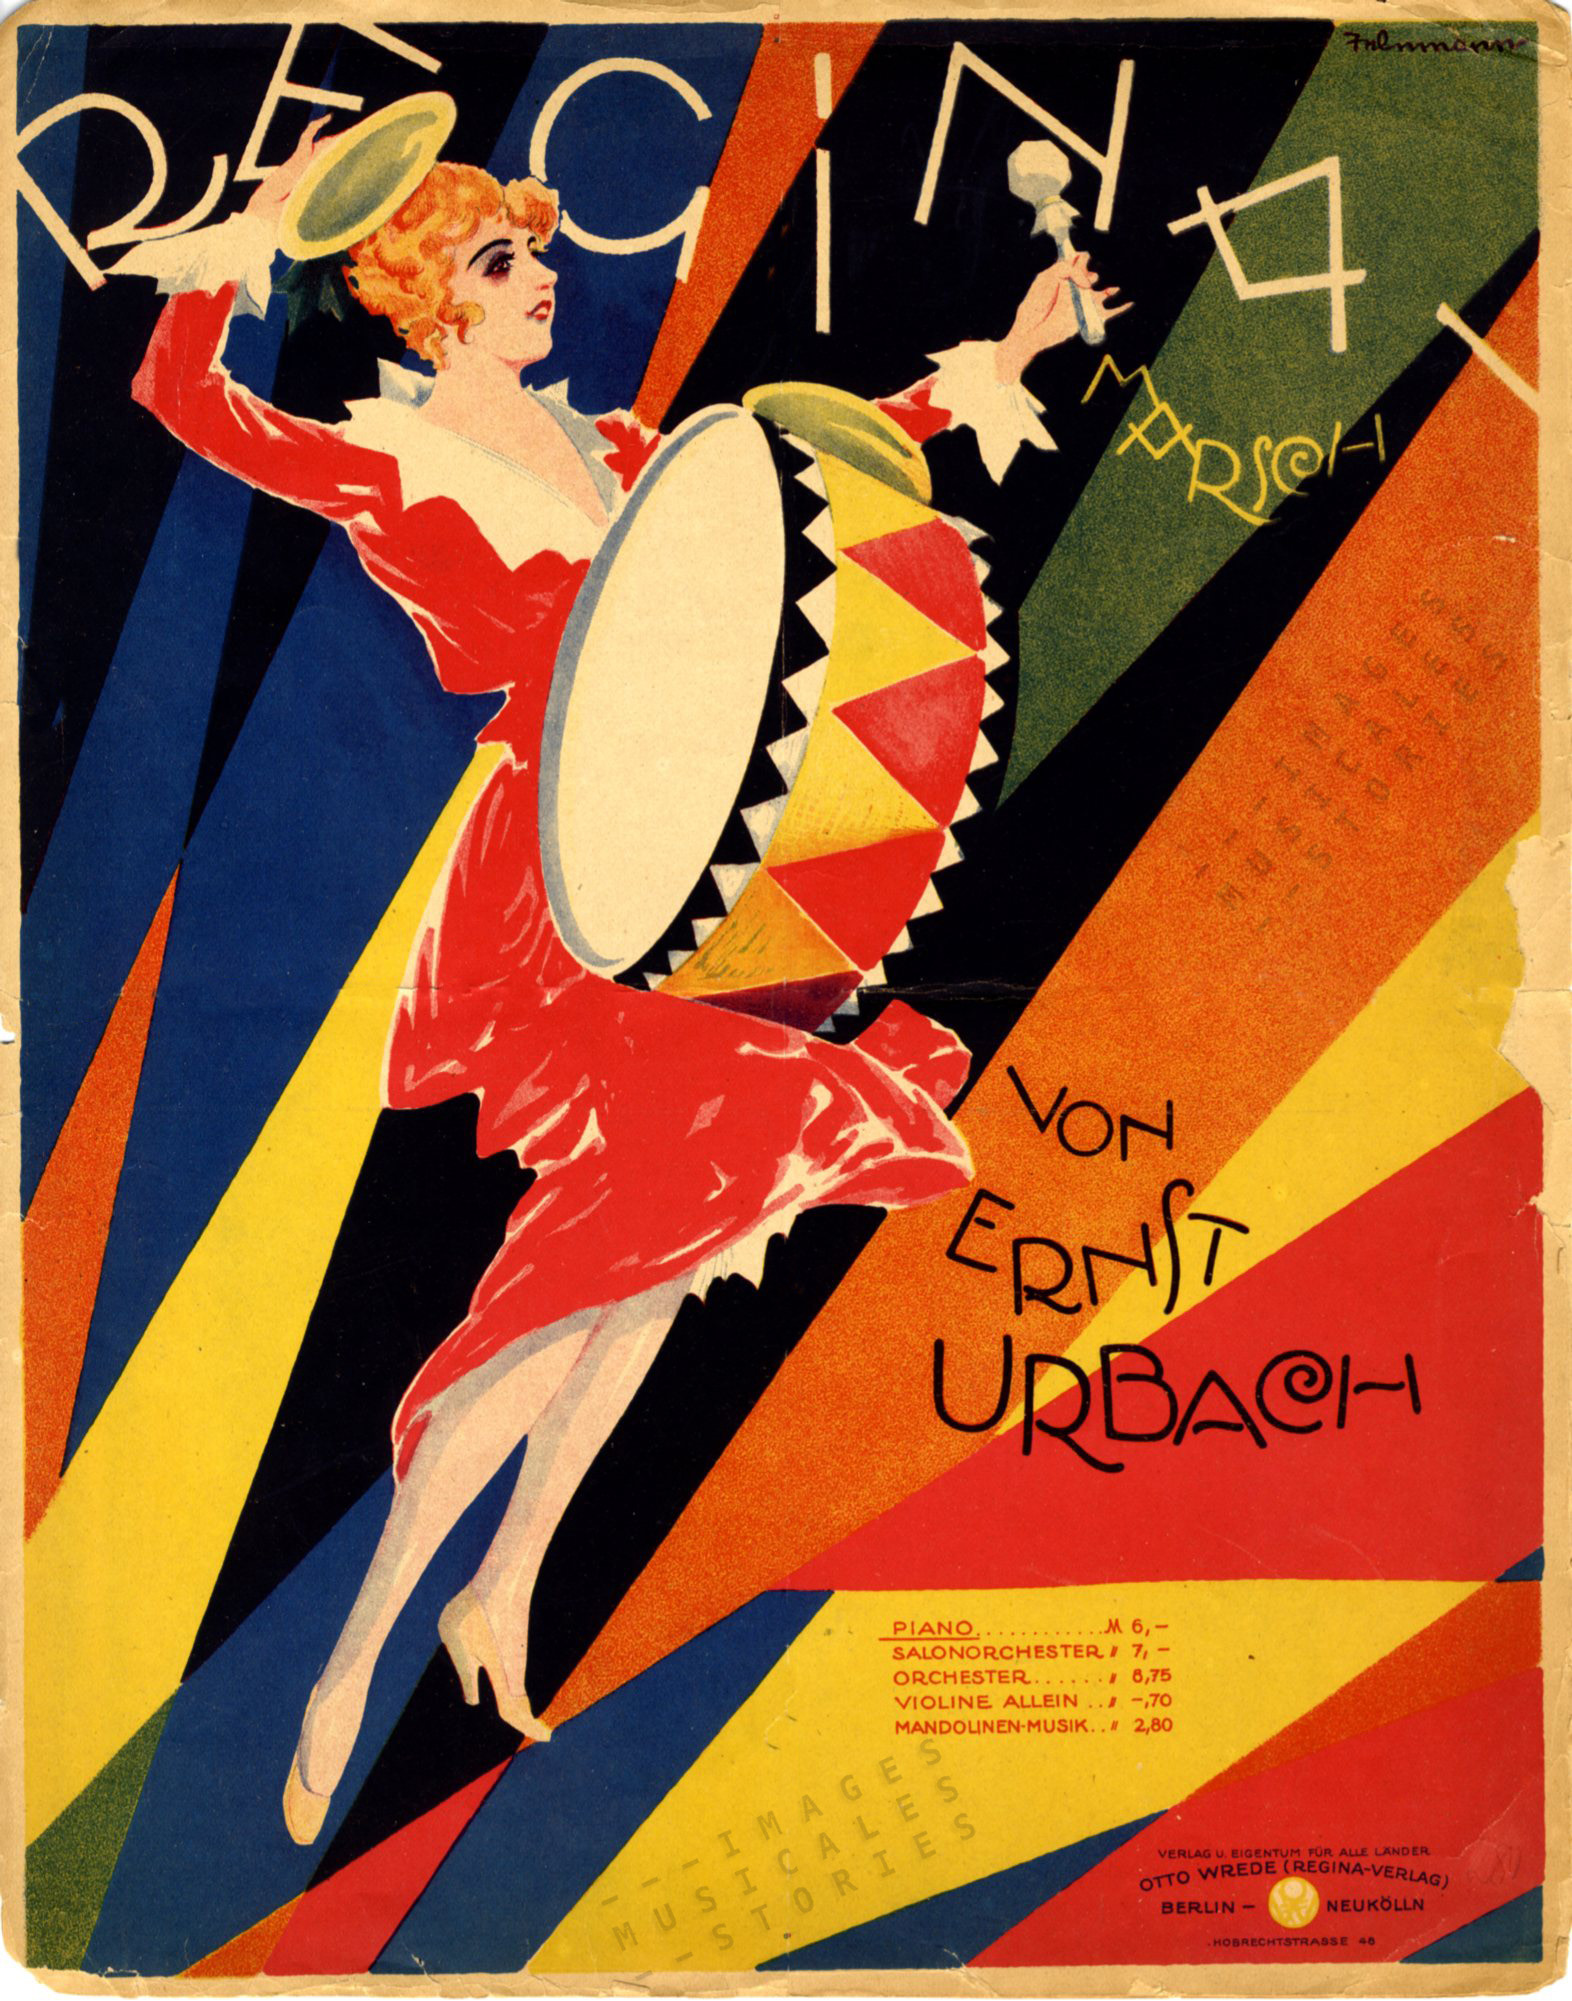 Sheet music cover illustrated by P. Telemann